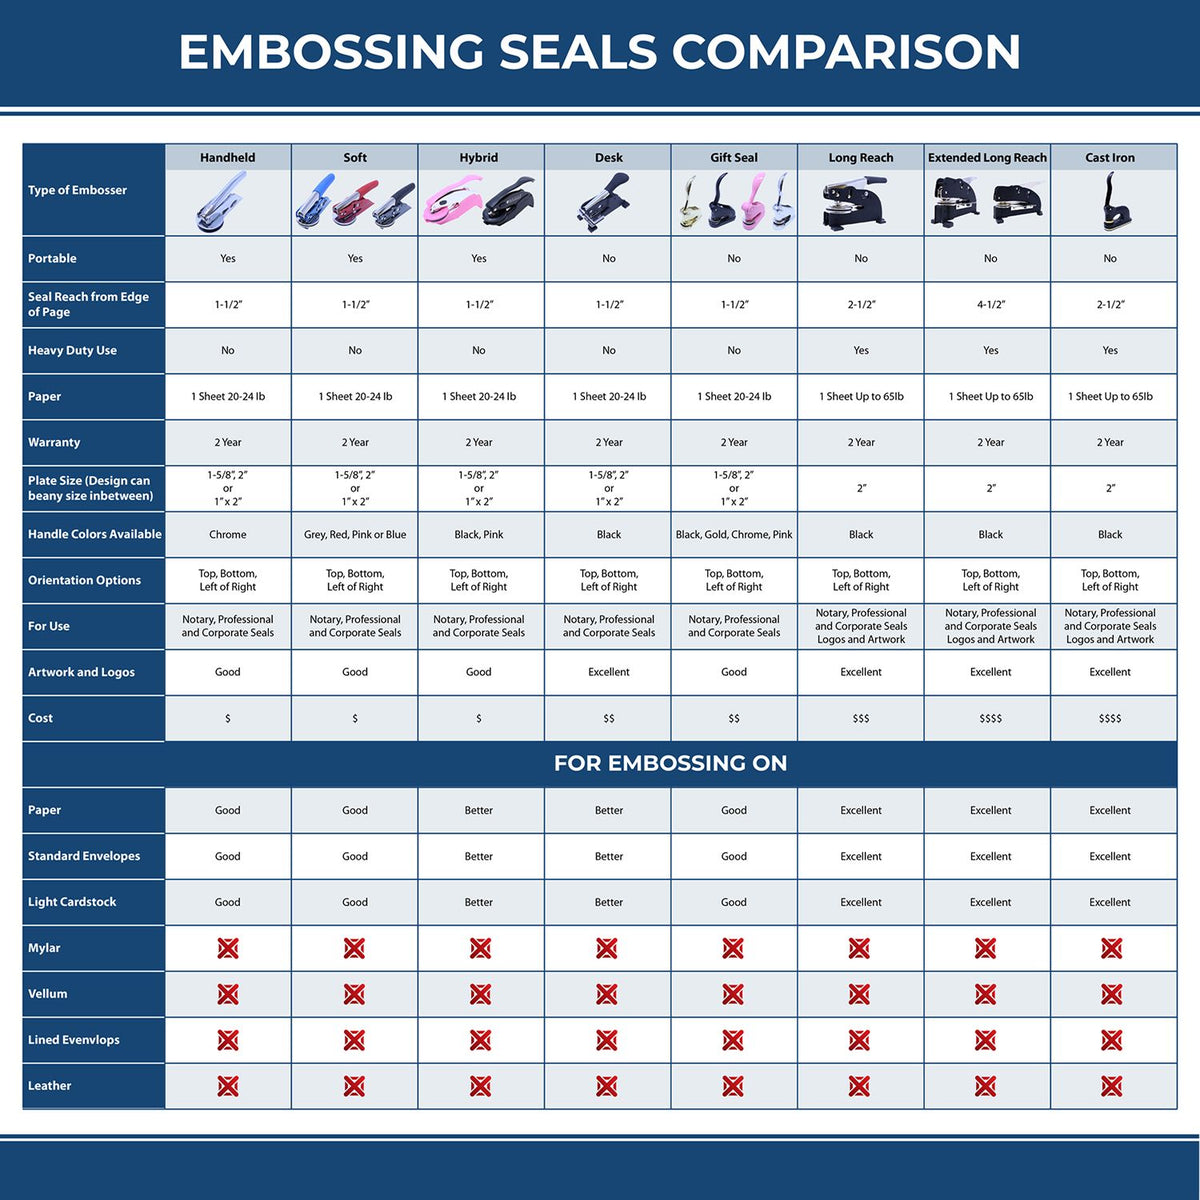 A comparison chart for the different types of mount models available for the Soft Tennessee Professional Engineer Seal.